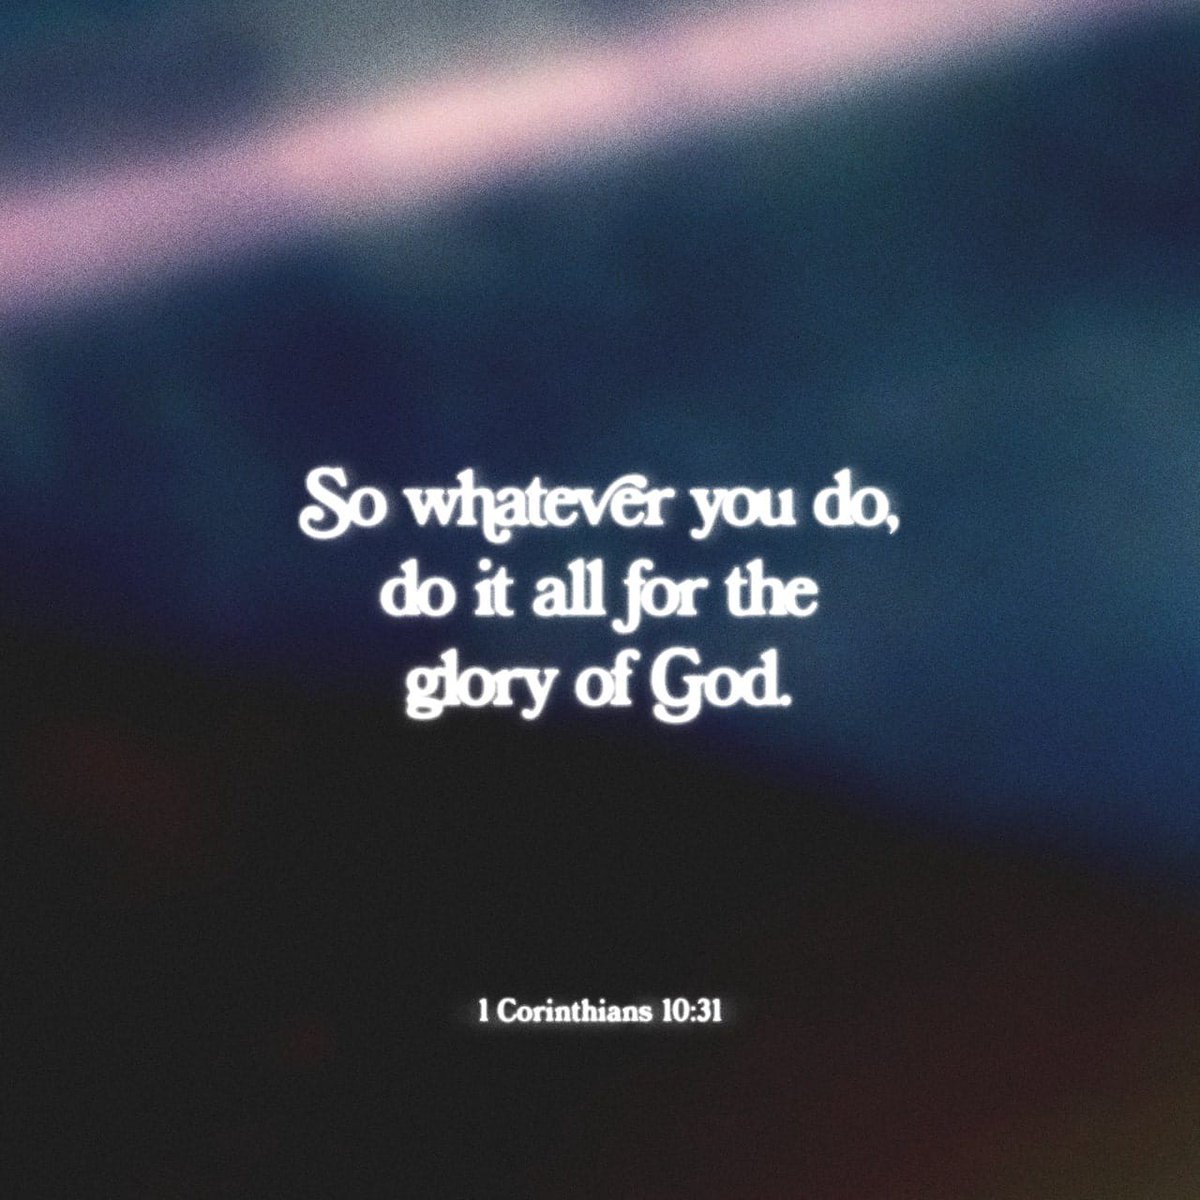 [1 Corinthians 10:31 KJV] Whether therefore ye eat, or drink, or whatsoever ye do, do all to the glory of GOD.